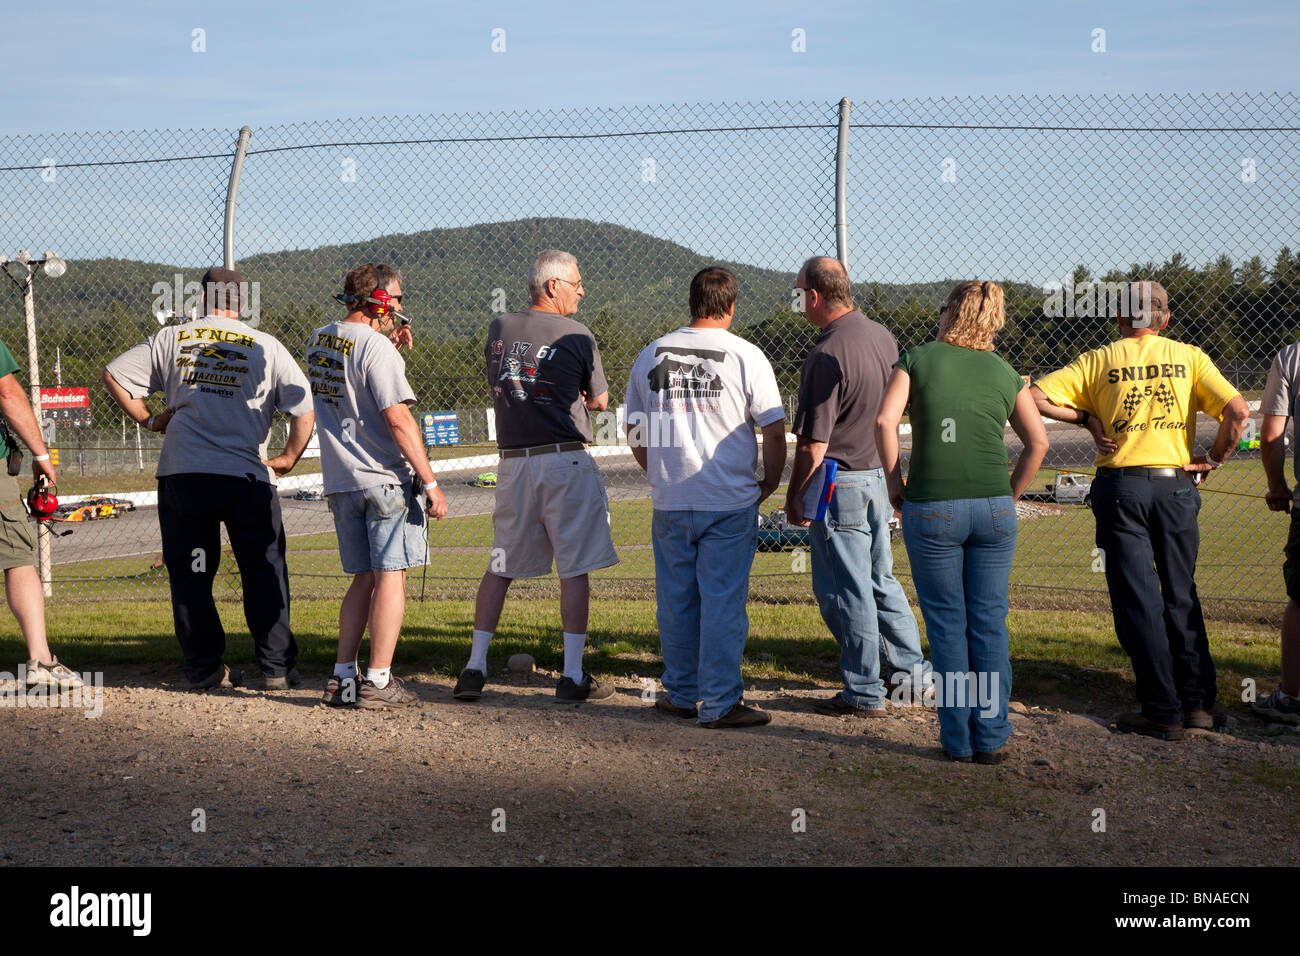 Woodstock, New Hampshire - Pit crew members watch stock car racing at White Mountain Motorsports Park. Stock Photo